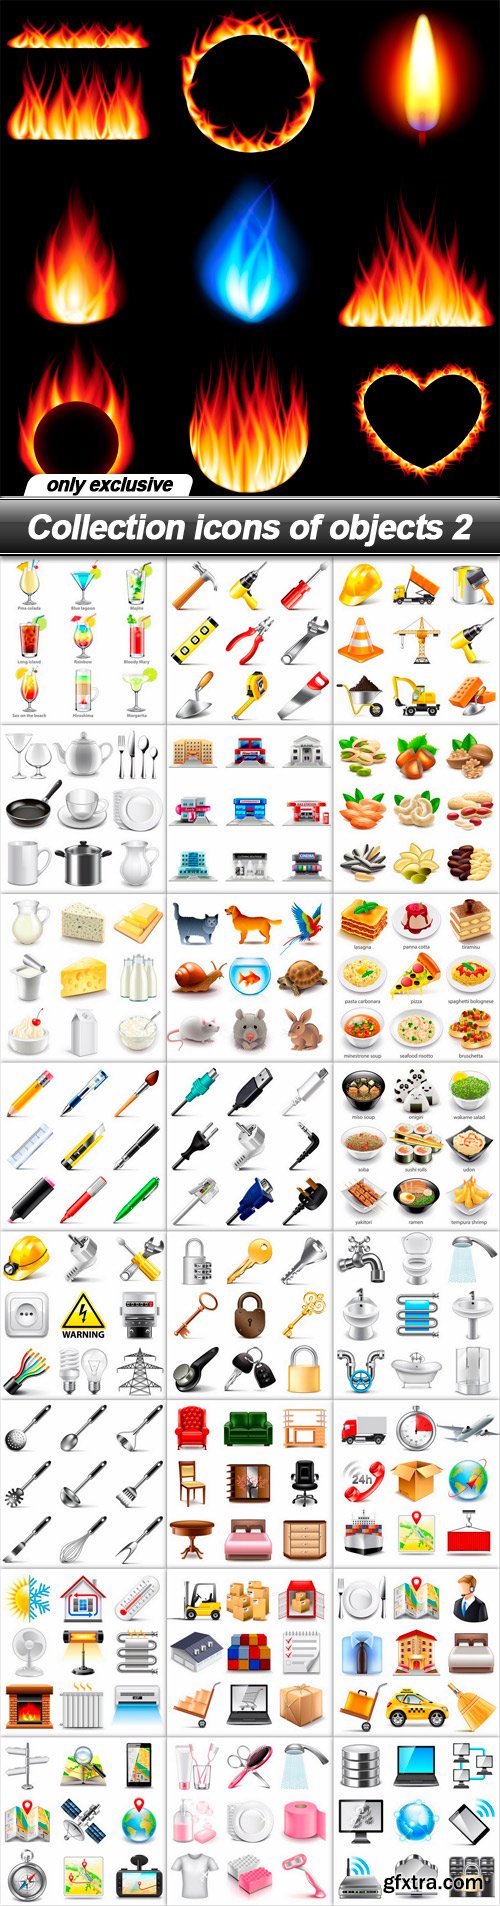 Collection icons of objects 2 - 25 EPS